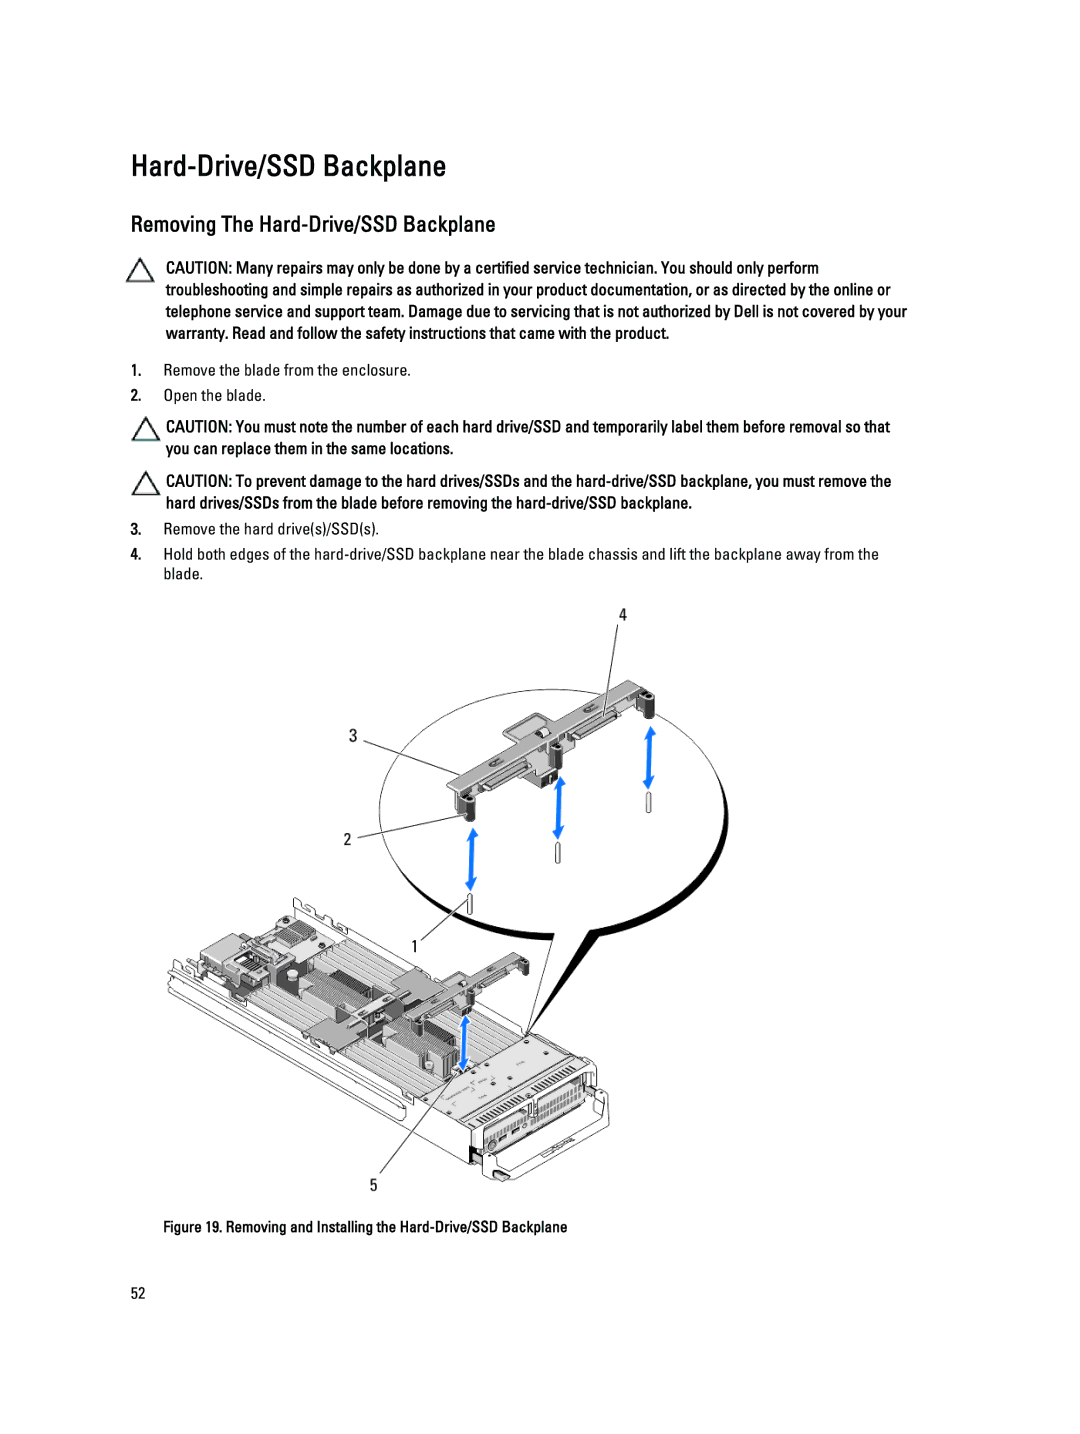 Dell M620 owner manual Removing The Hard-Drive/SSD Backplane 